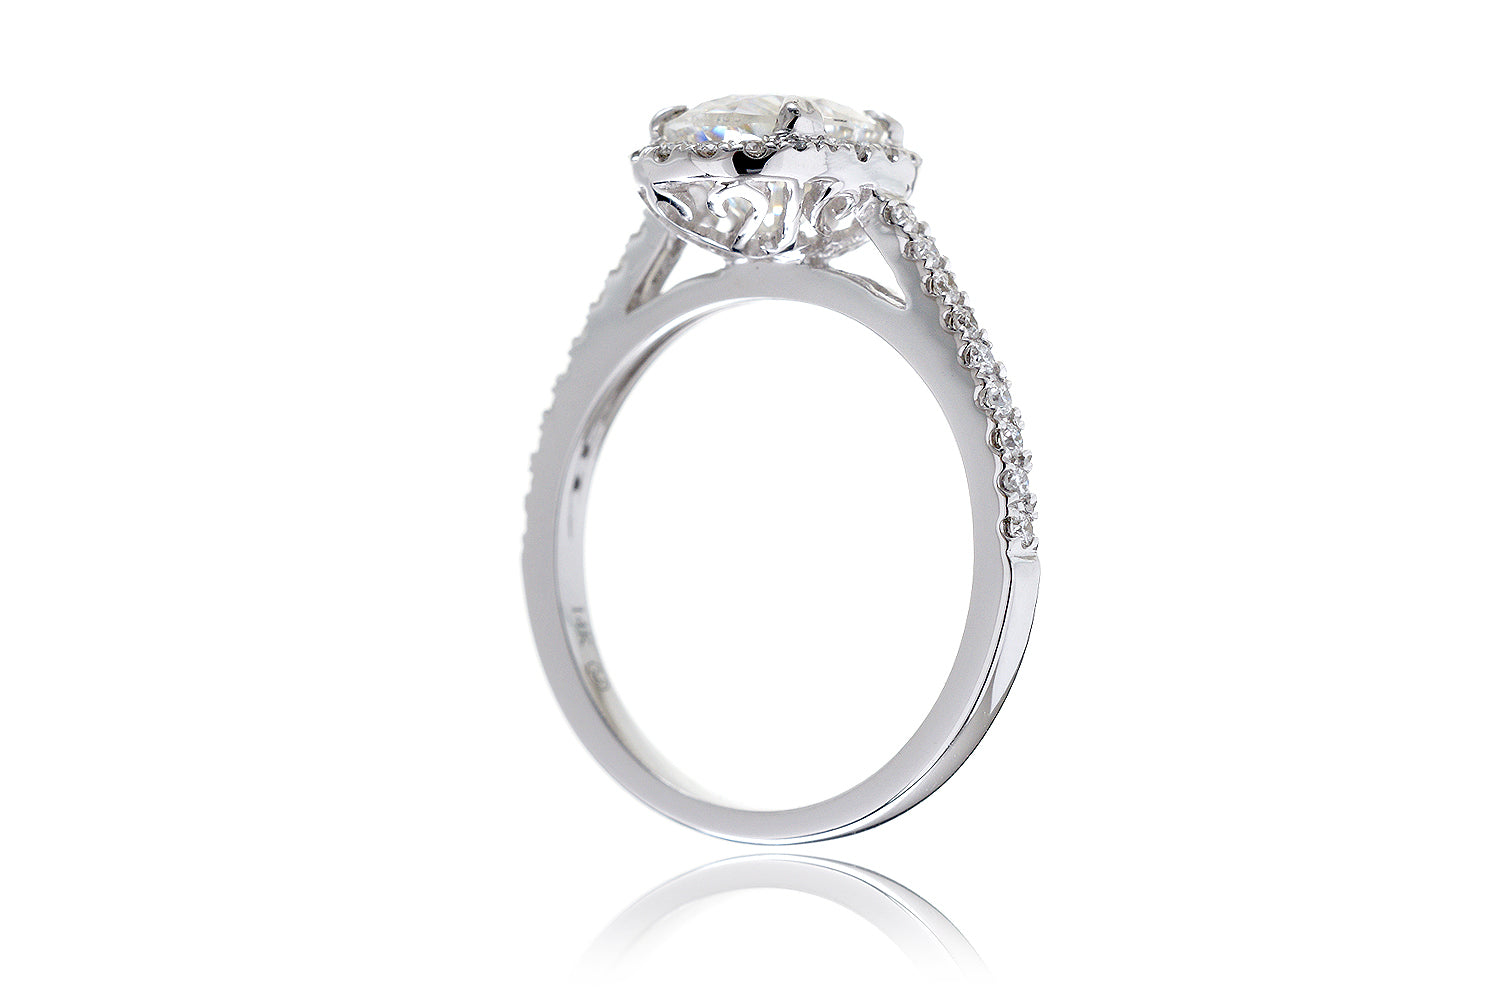 The Signature Oval Moissanite